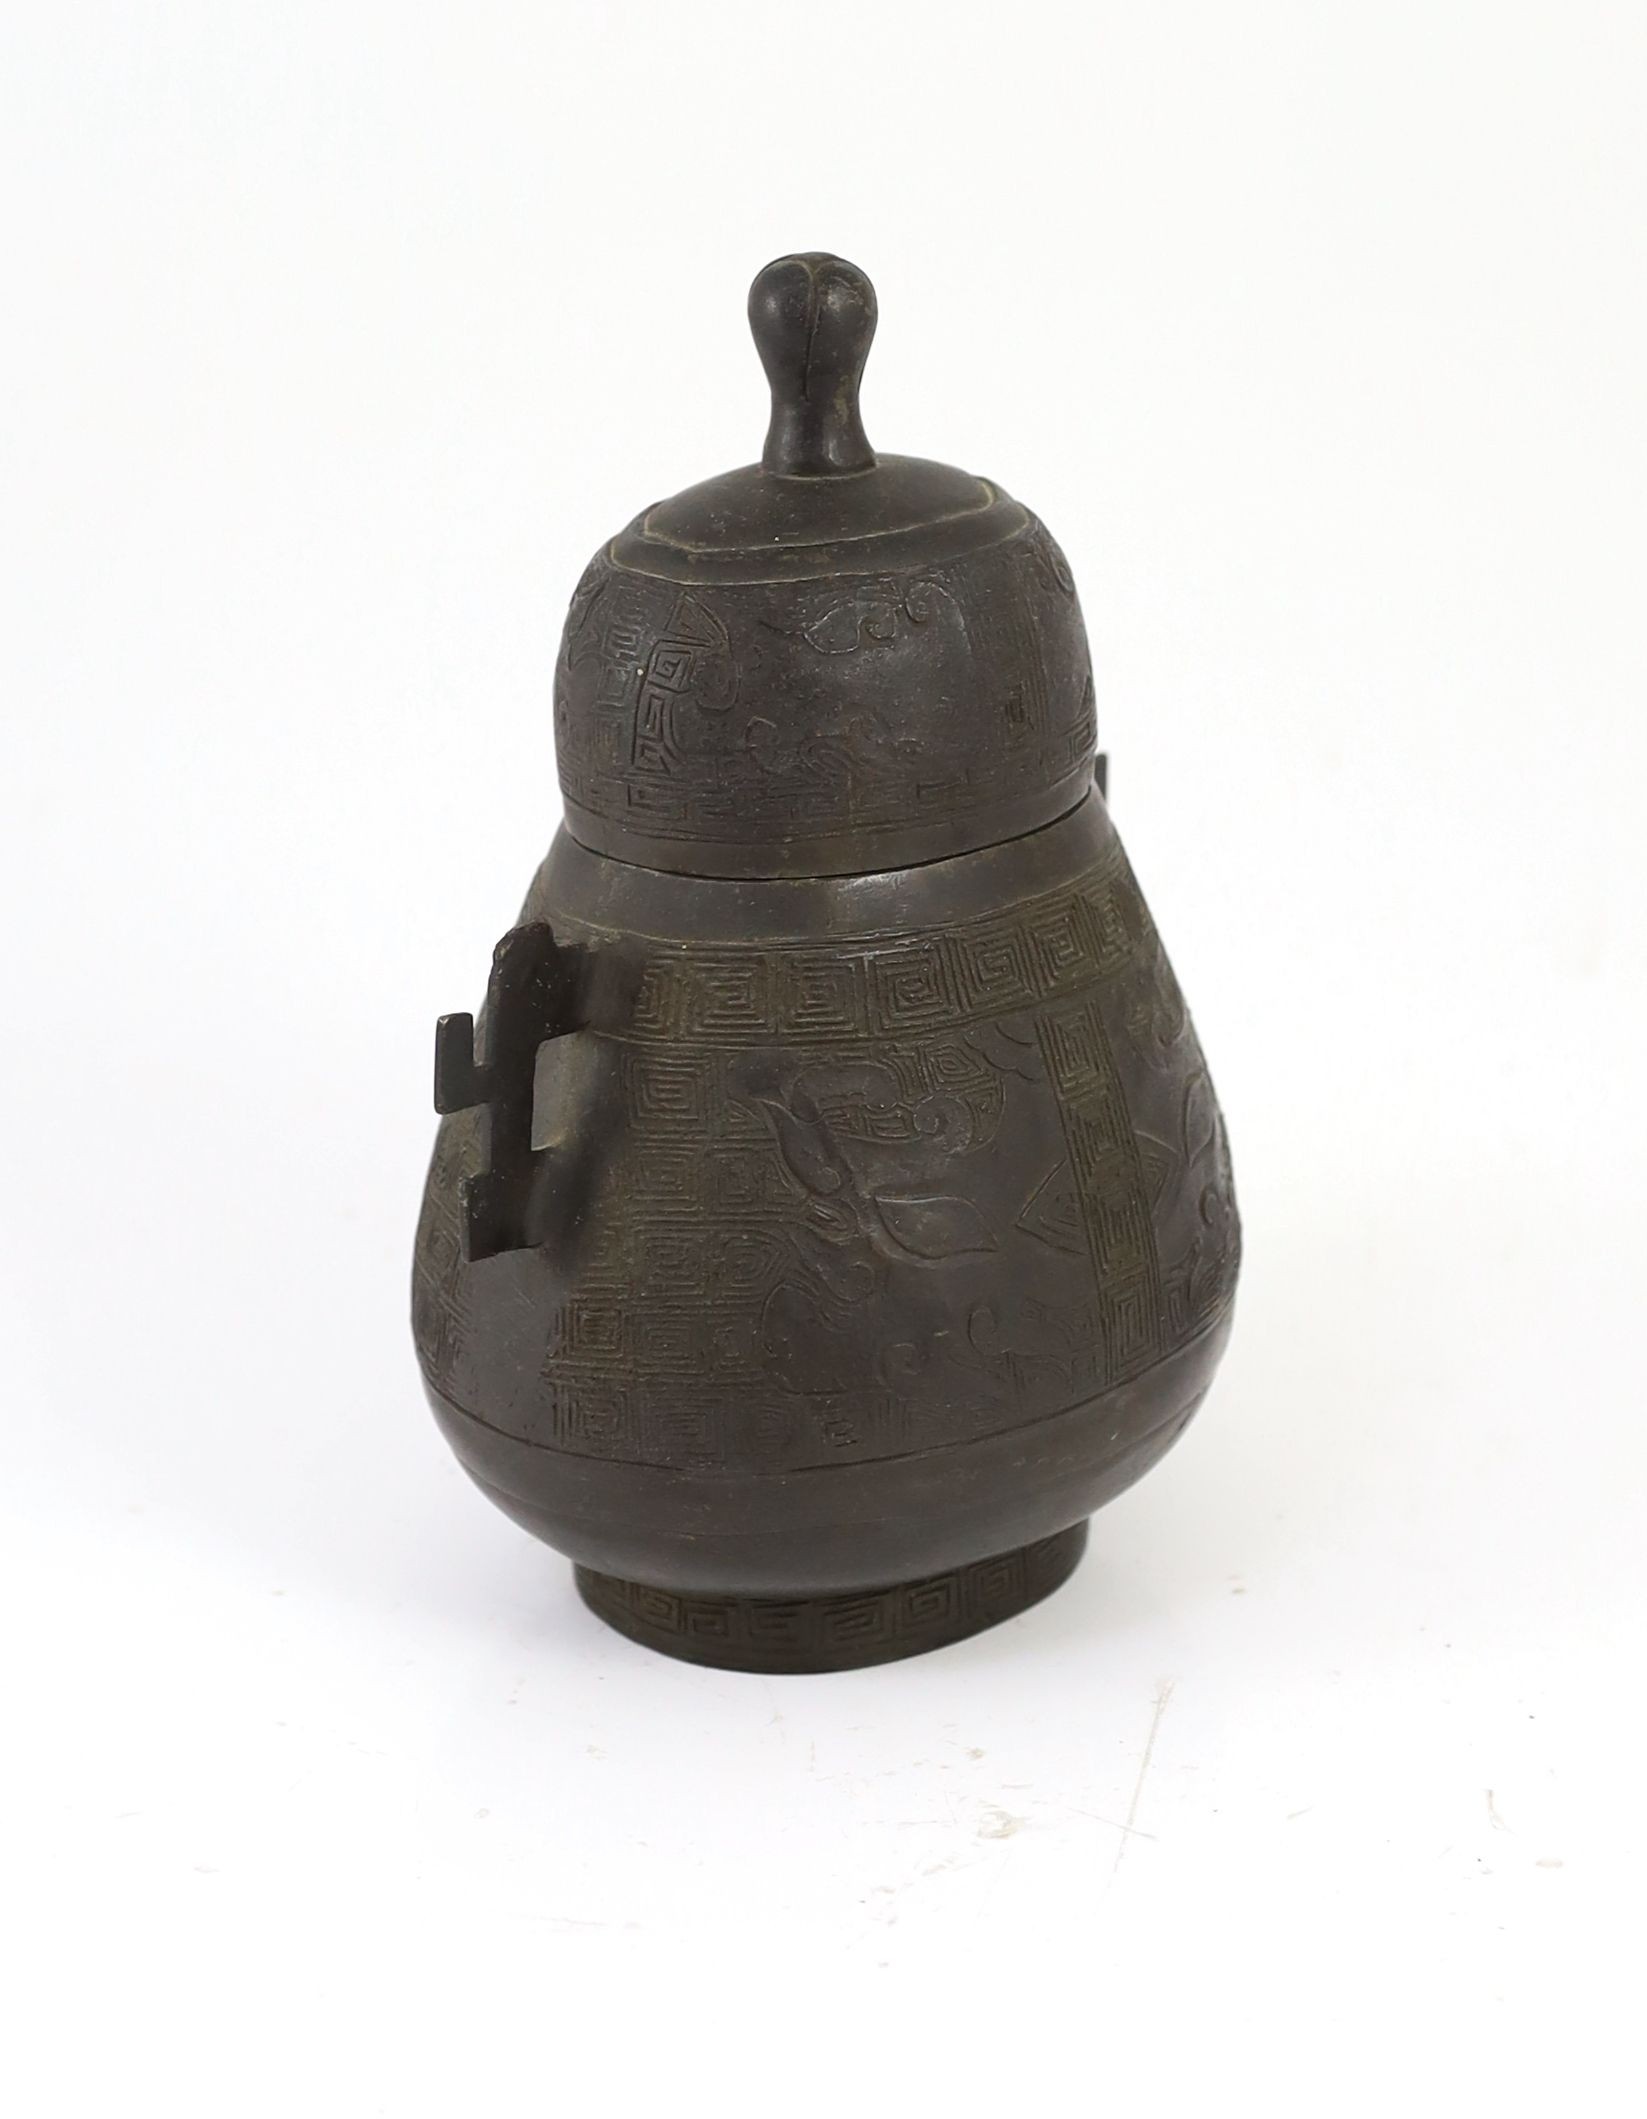 A Chinese bronze jar and cover, hu, 17th/18th century, 18cm high, losses to handles